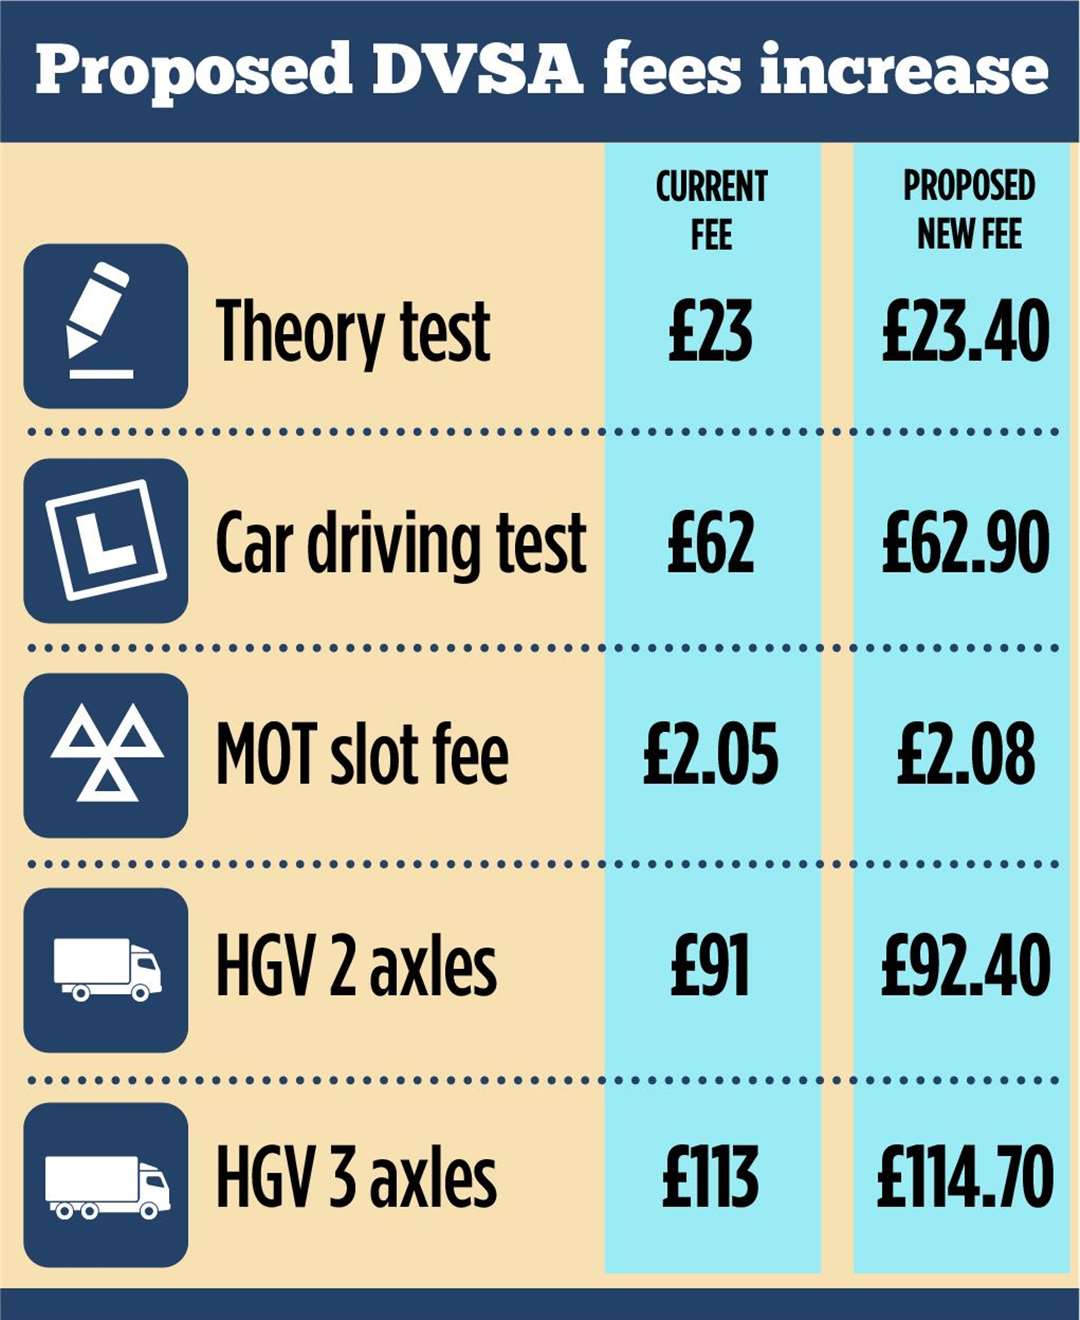 The DVSA is proposing a 1.5% increase to all its fees to help it maintain services (49929713)